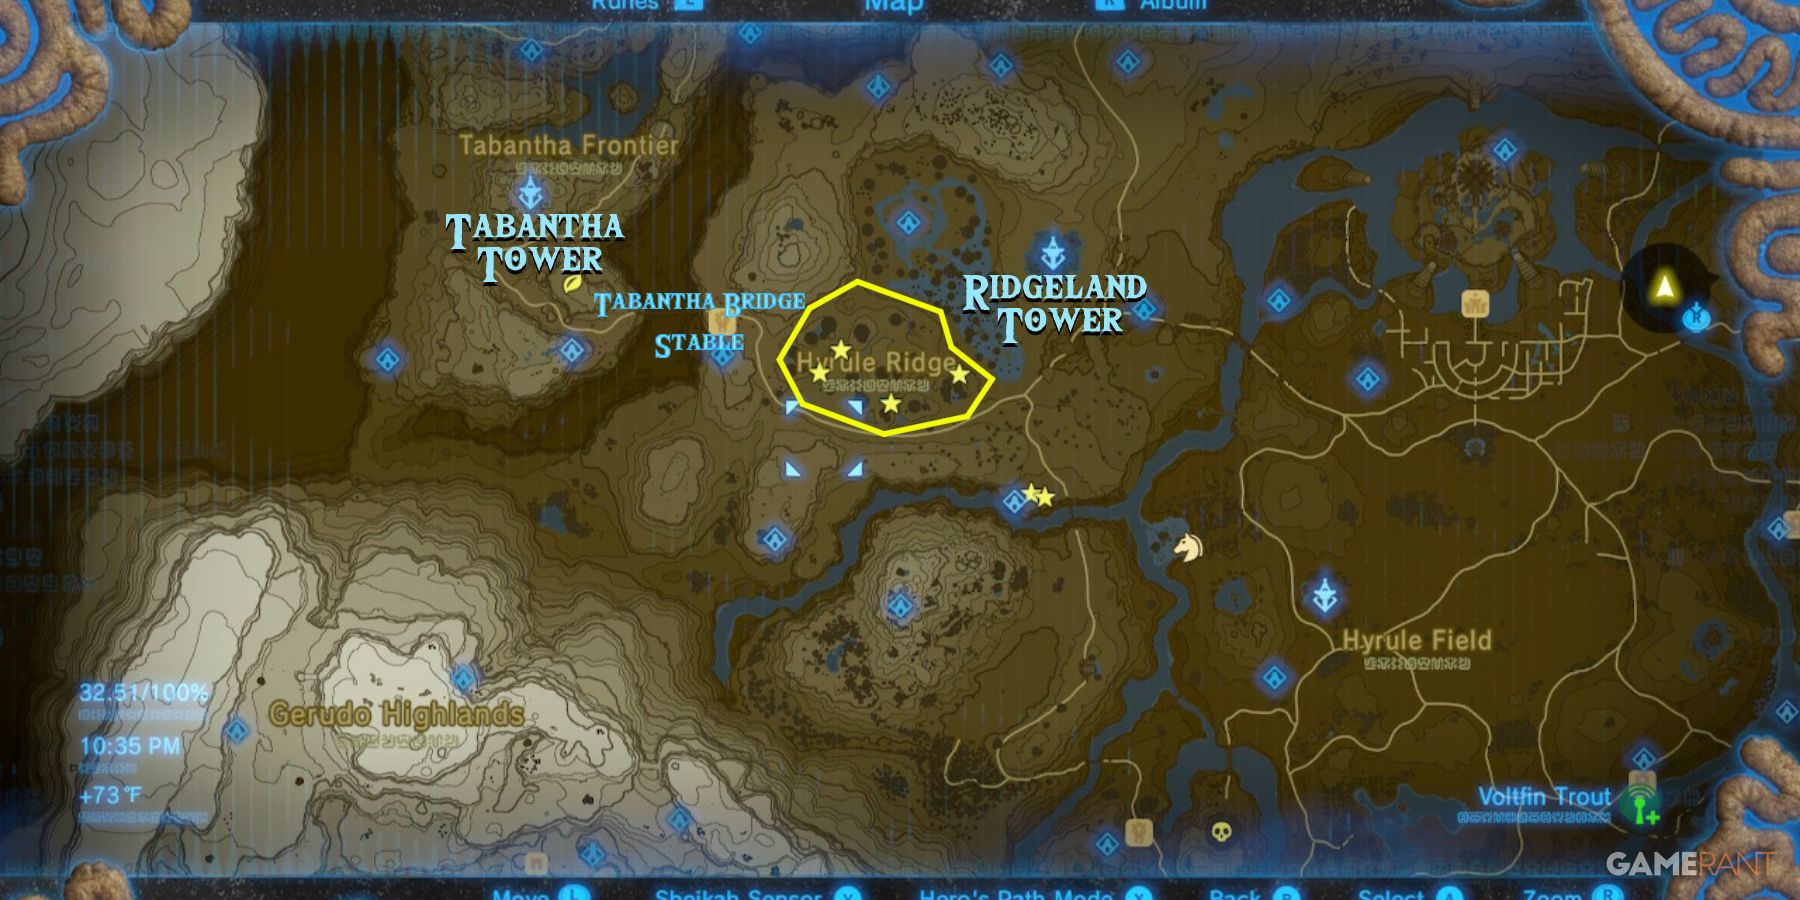 Breath of the Wild: Where to Farm Tireless Frogs